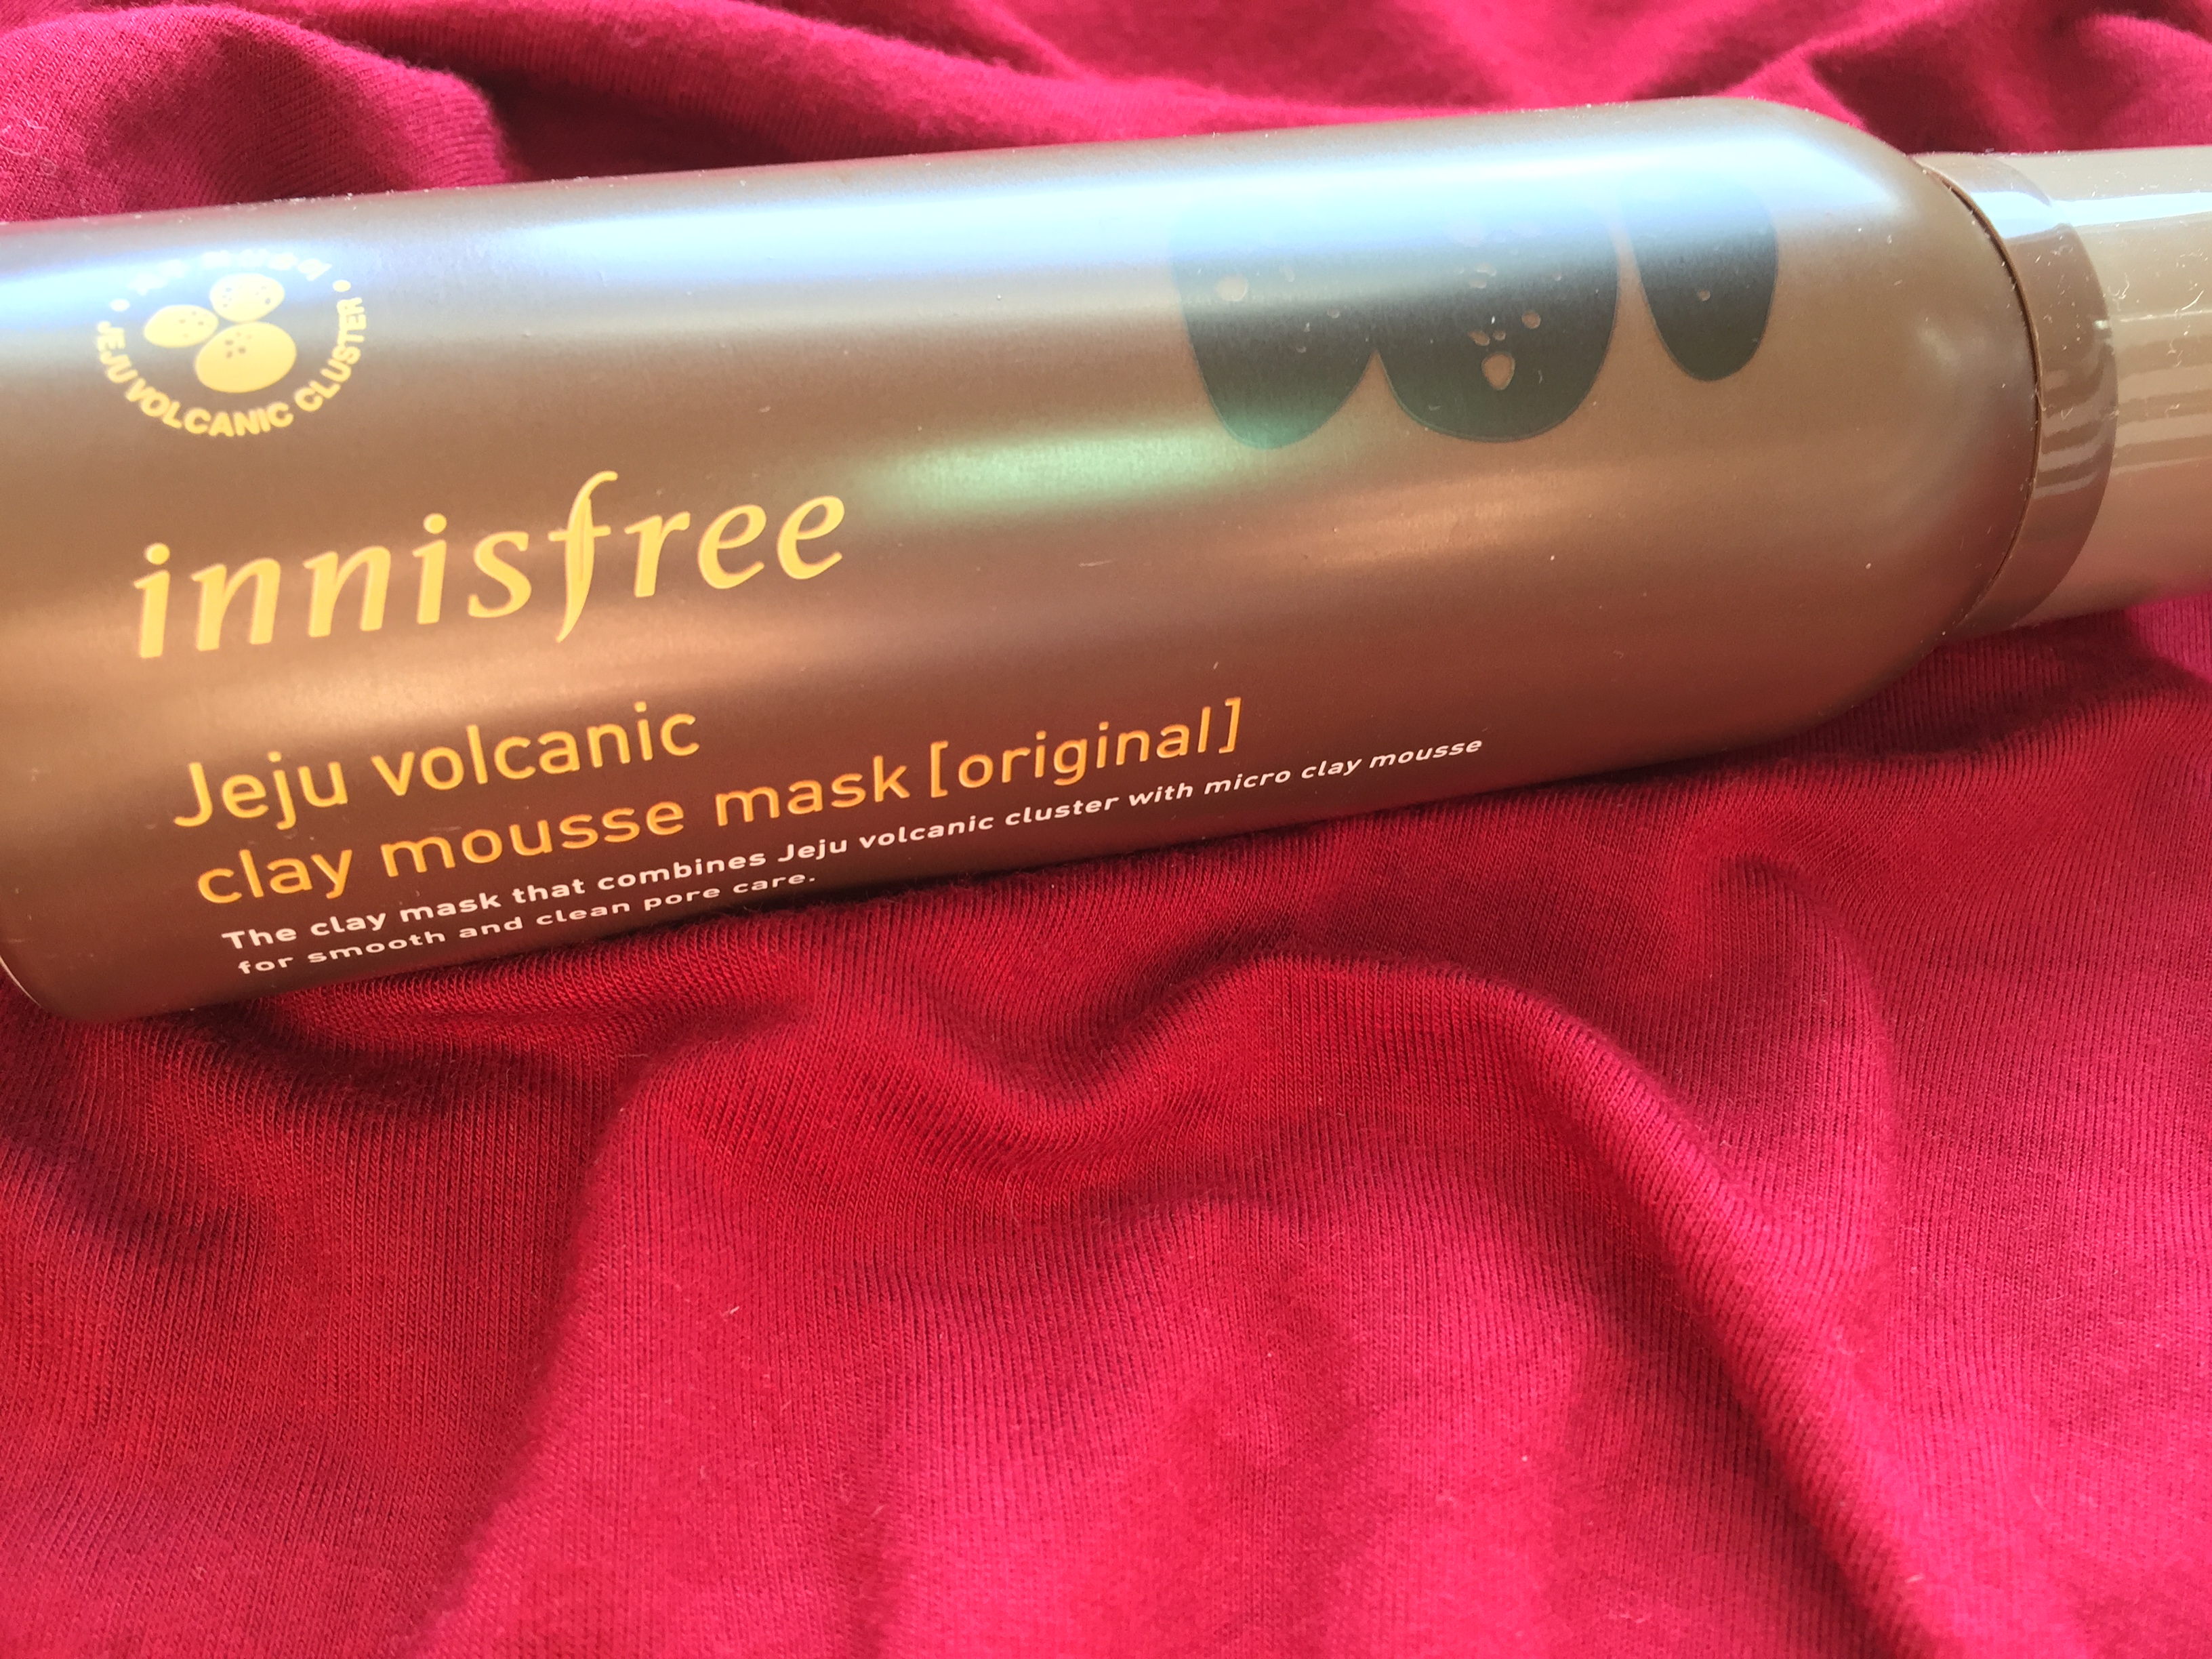 [Review] Innisfree Jeju Volcanic Clay Mousse Mask (Original)